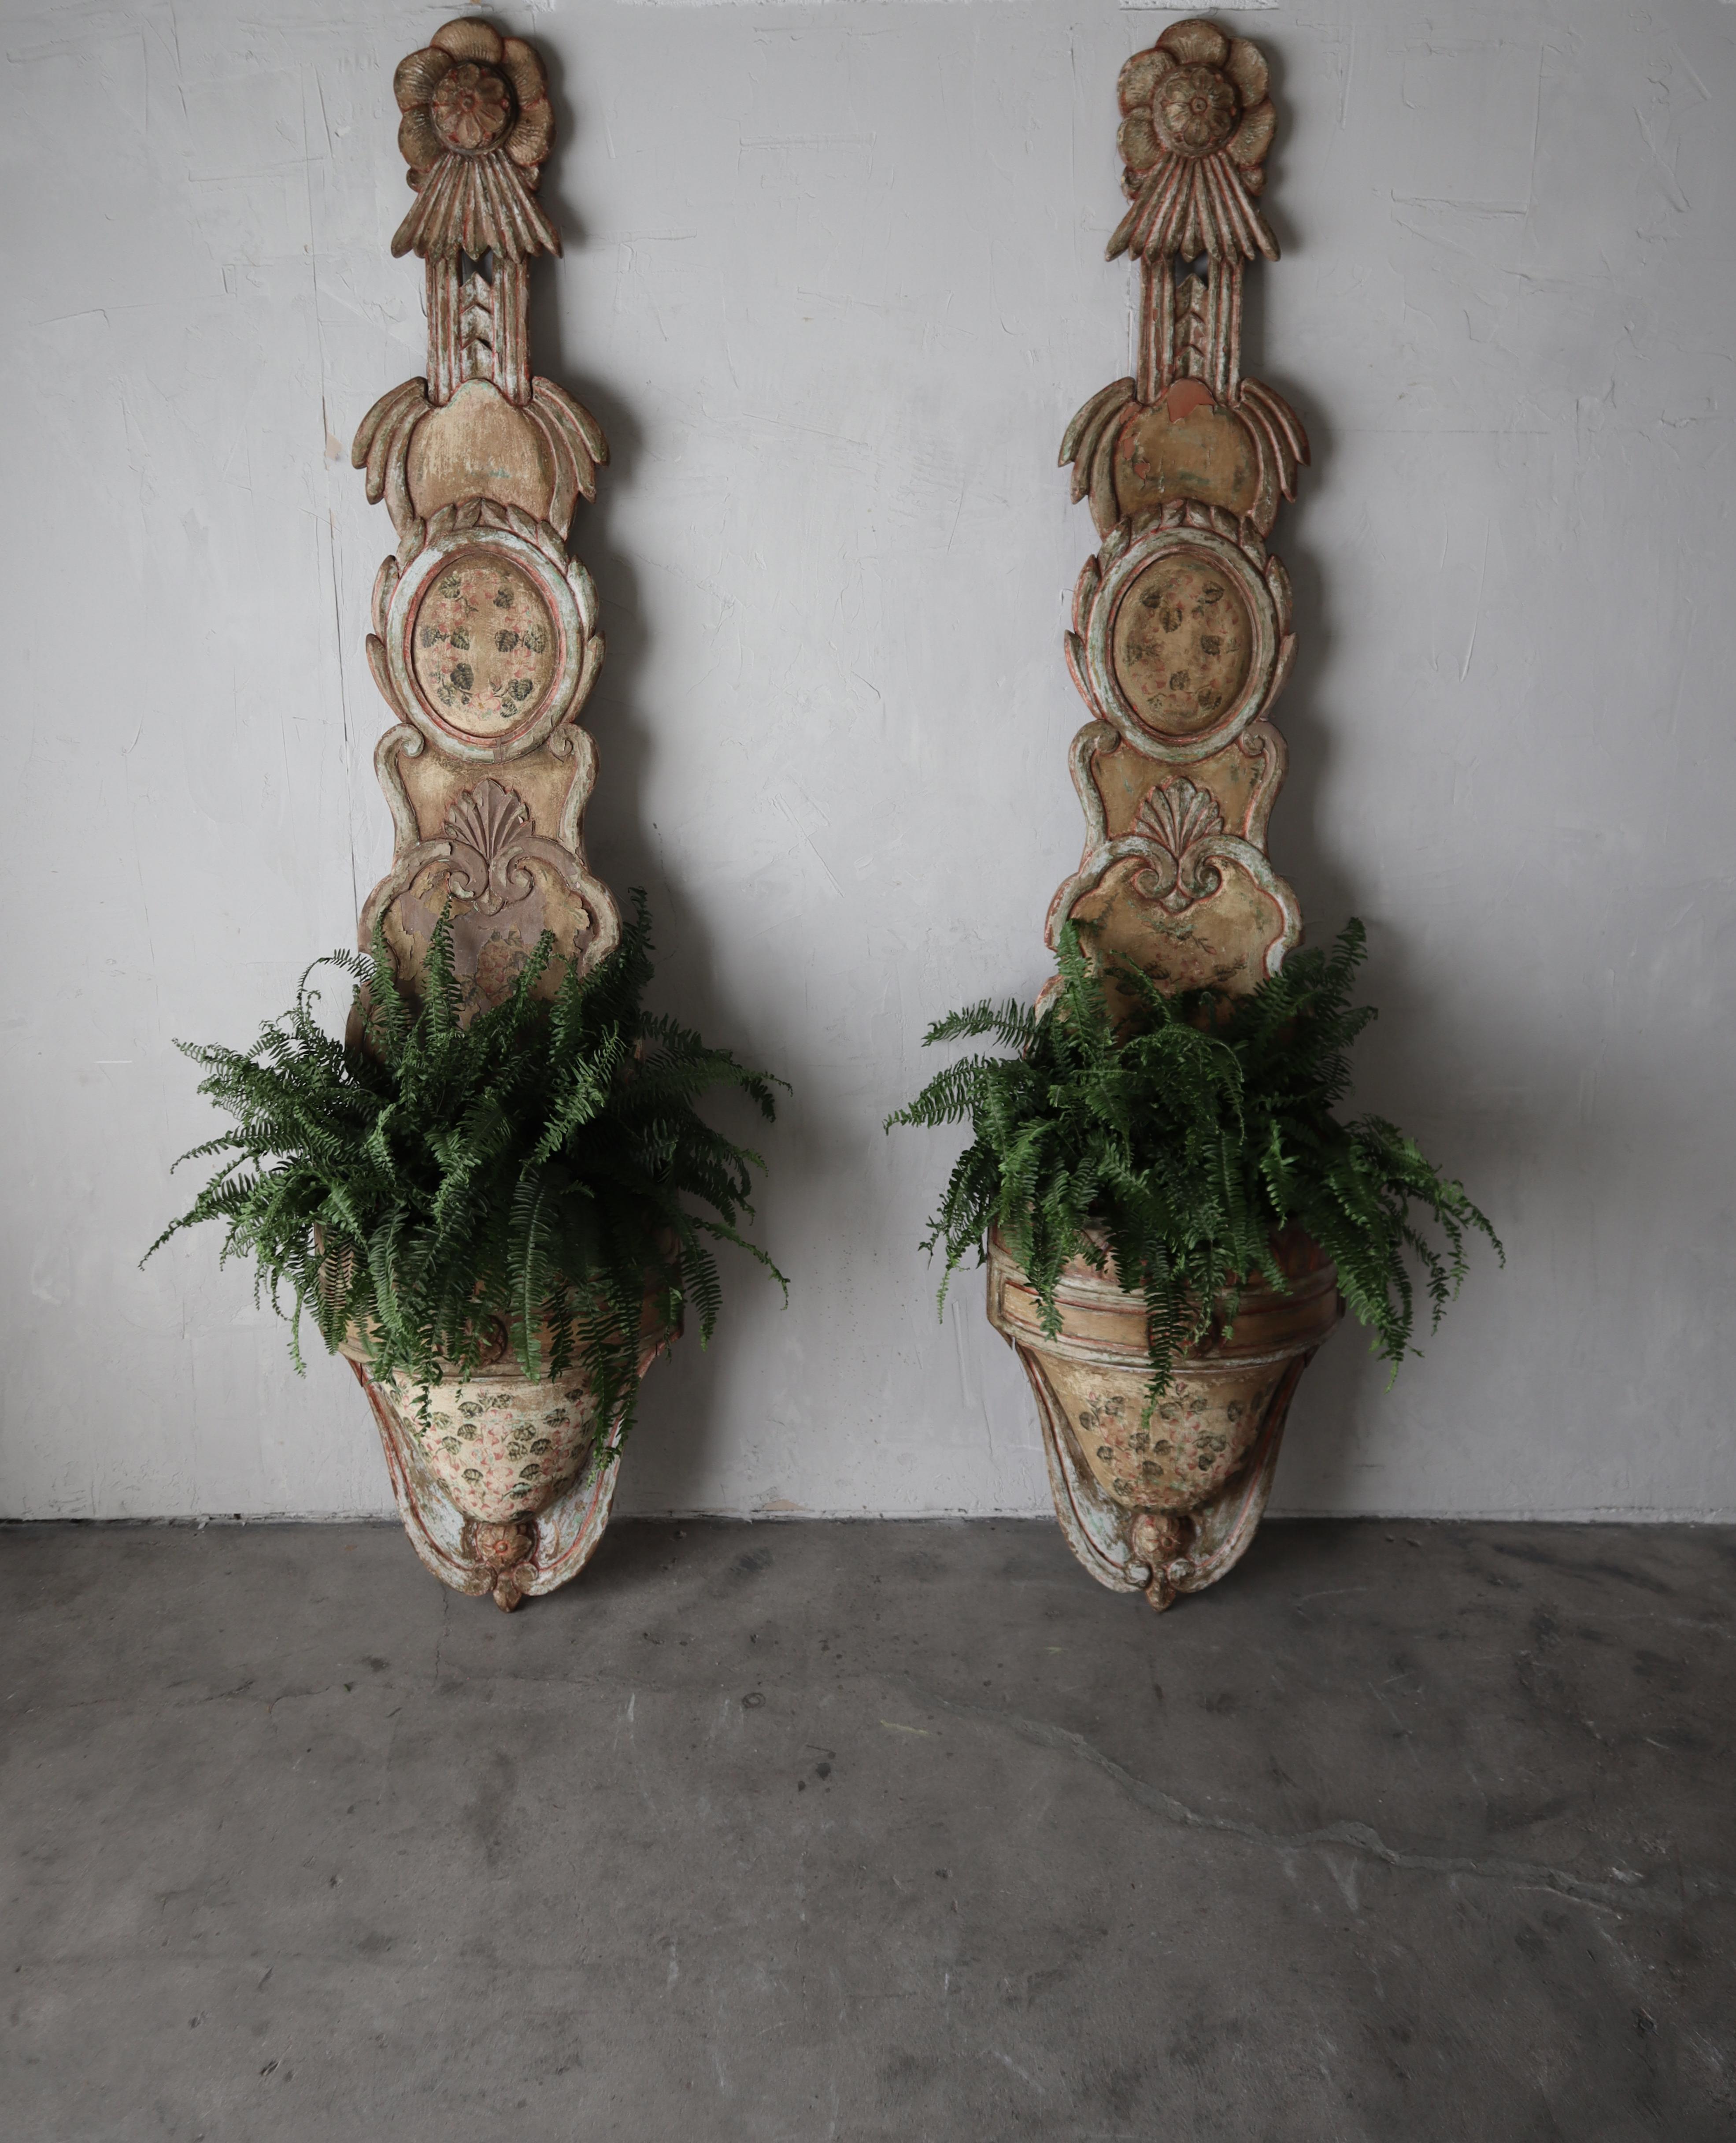 Unbelievable pair of 8ft Tall Antique French Carved Wood Jardiniere Planters.  These can be used outdoor but I love the statement they would make indoor.  Massive pieces of living art.

The pieces are being sold as found in aesthetically pleasing,